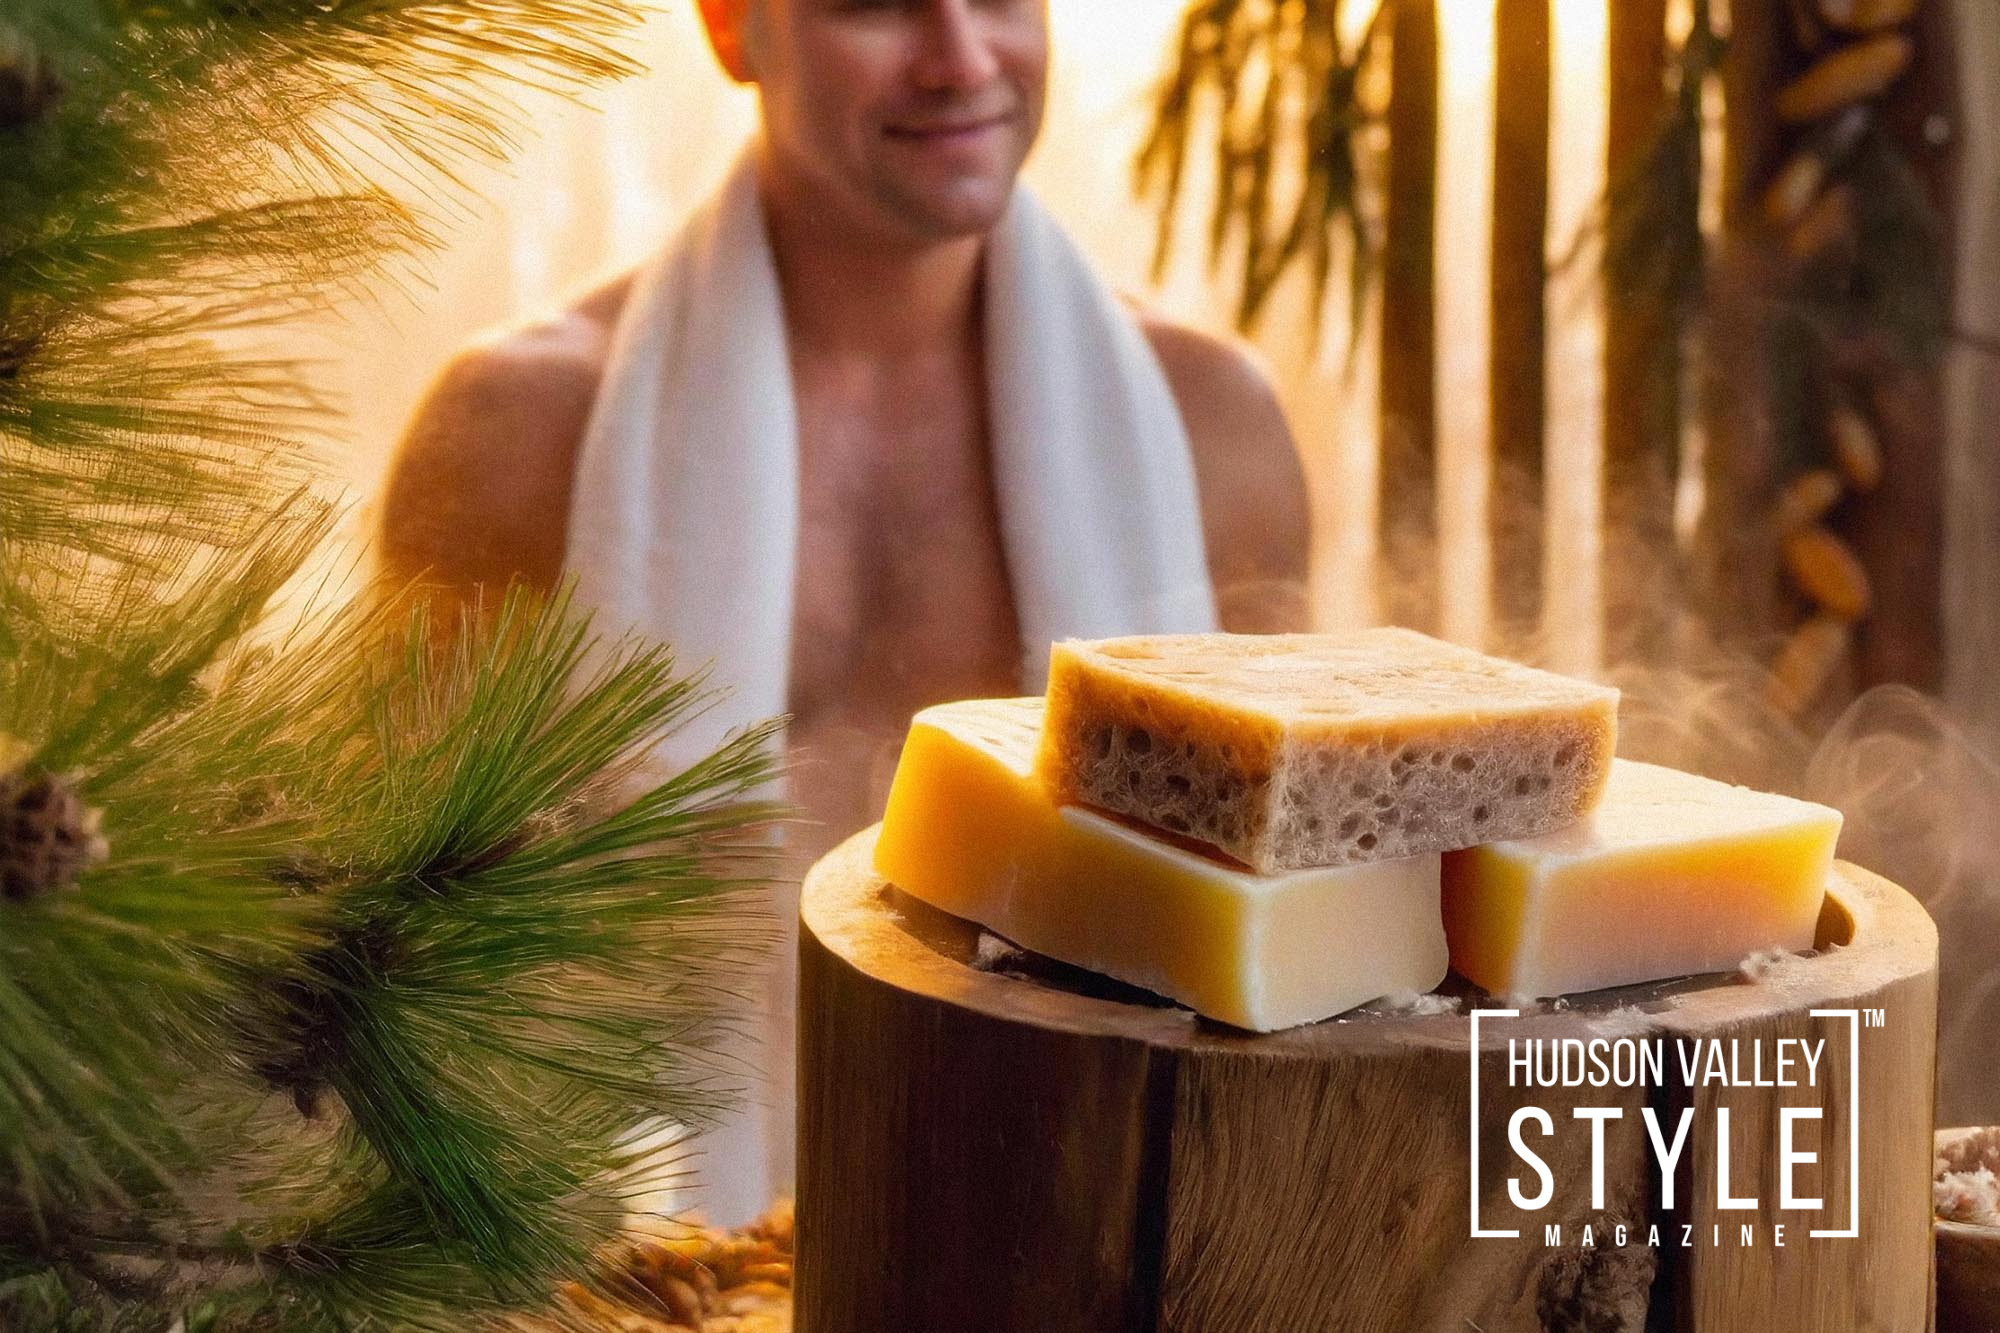 Ditch the Shower Gel: Why Natural Soap Bars Are a Testosterone-Boosting Power Move for Active Men – Presented by HARD NEW YORK – The Best Natural Skincare for Men